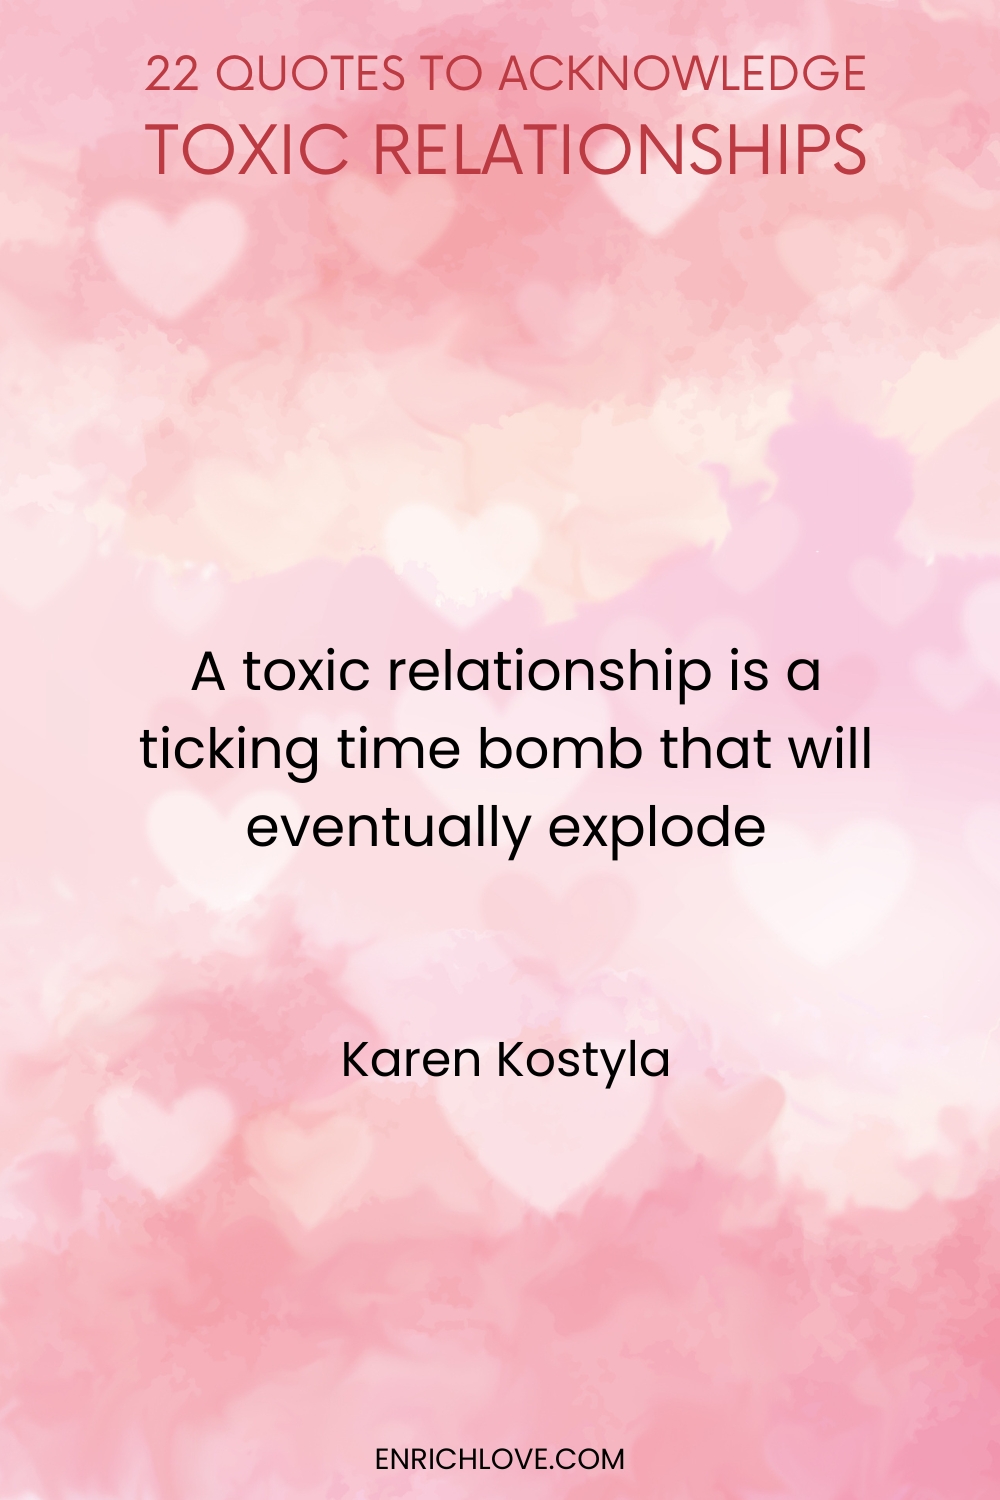 22 Quotes to Acknowledge Toxic Relationships -A toxic relationship is a ticking time bomb that will eventually explode by Karen Kostyla